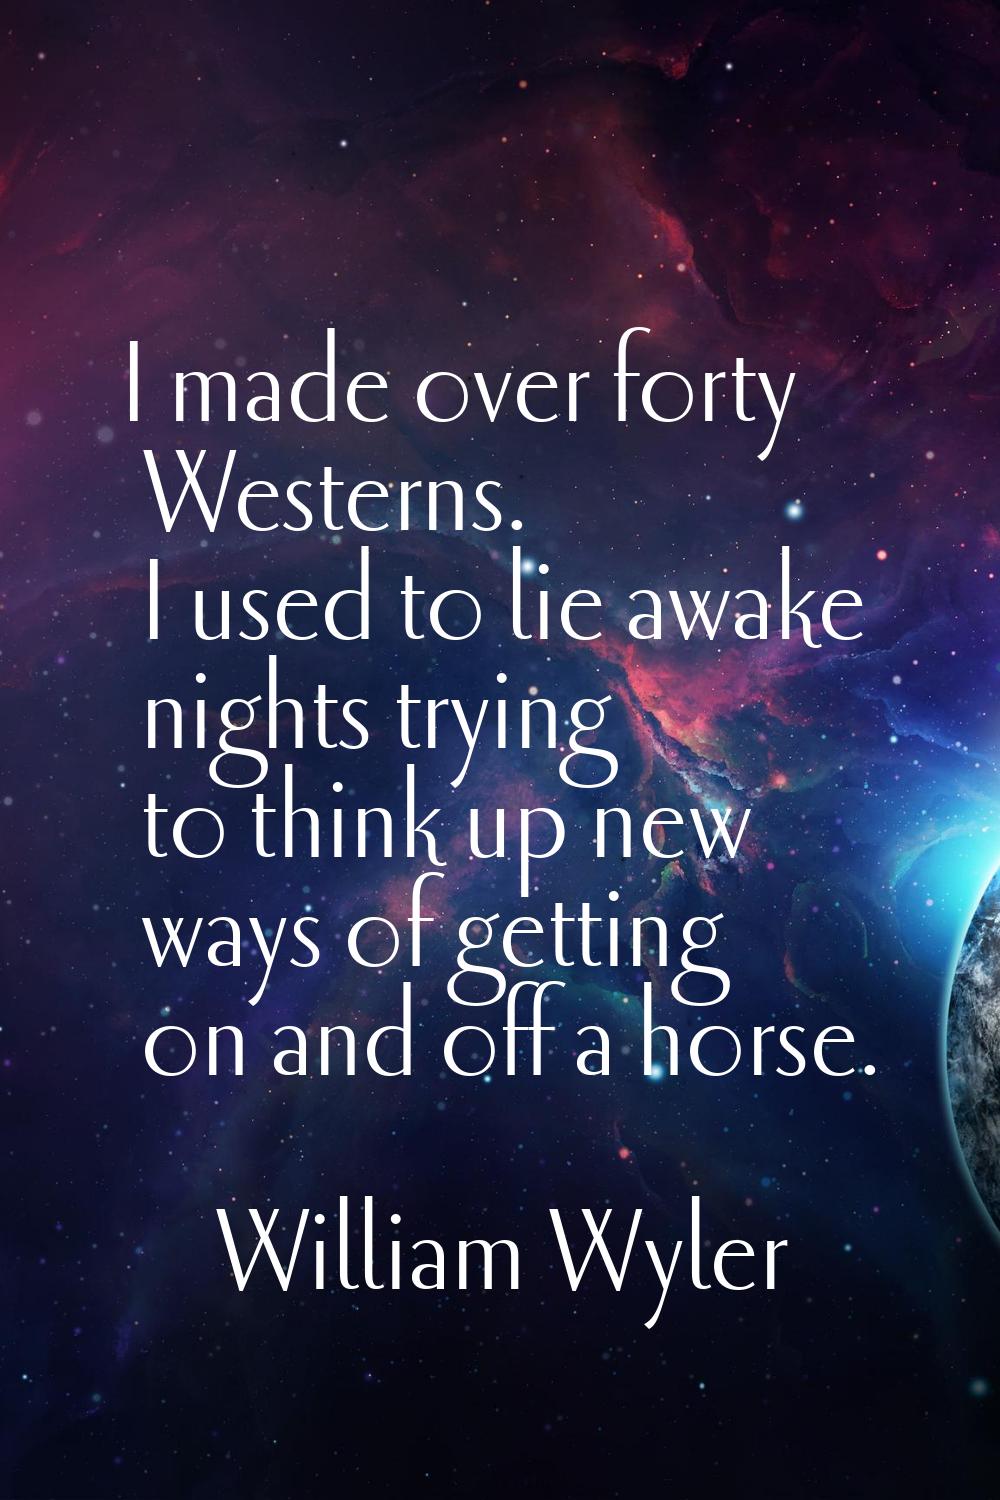 I made over forty Westerns. I used to lie awake nights trying to think up new ways of getting on an